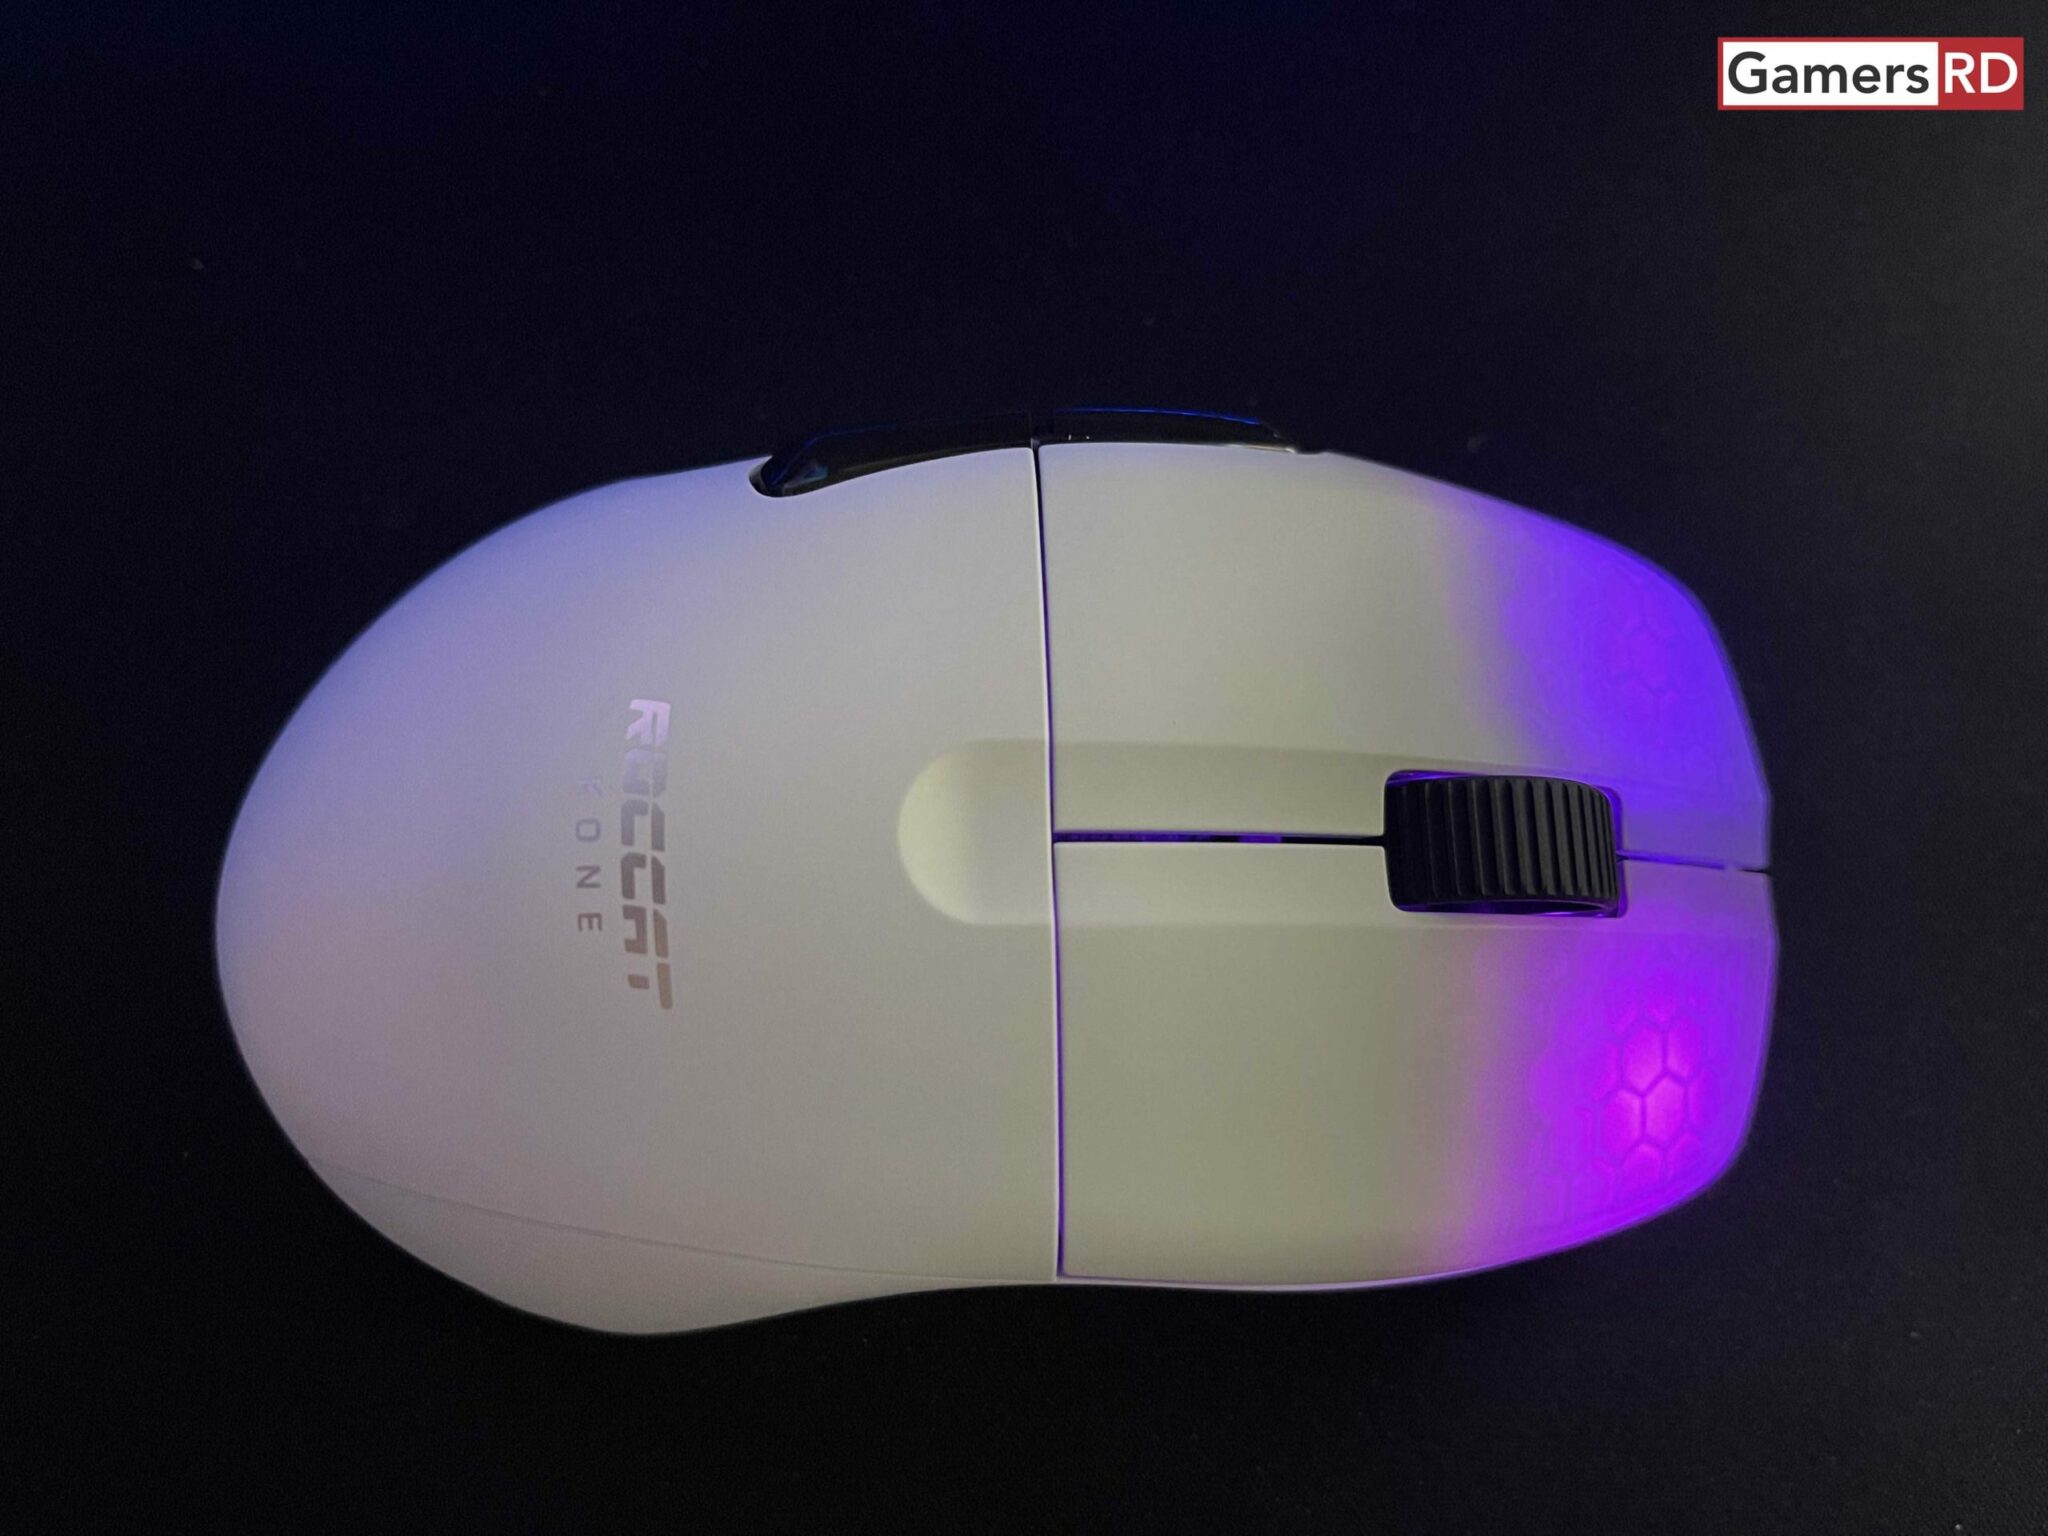 ROCCAT Kone Pro Air Gaming Mouse Review, 6 GamersRD